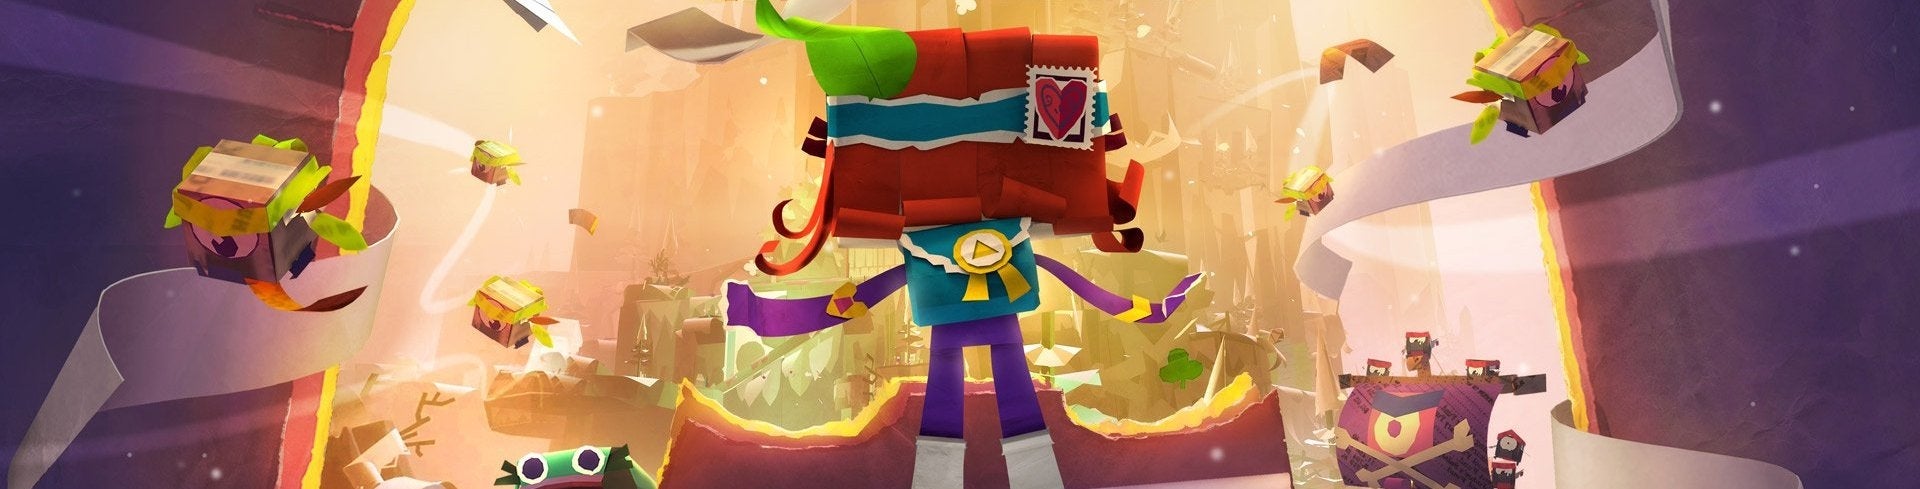 Image for Tearaway Unfolded review